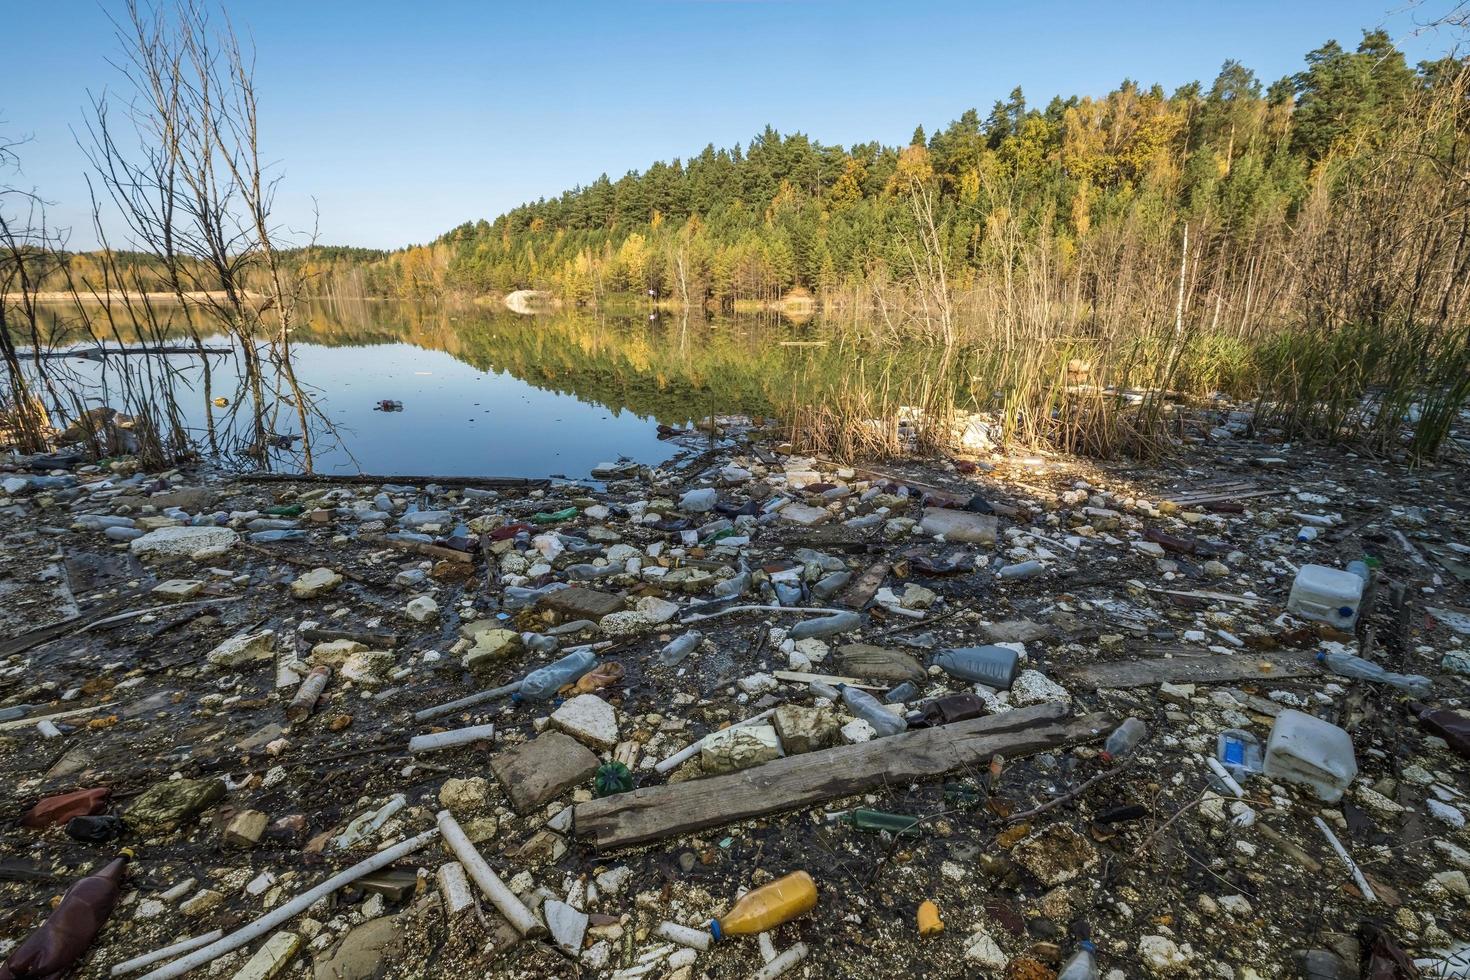 heaps of construction waste, household waste, foam and plastic bottles on the shore of a forest lake, environmental pollution problems photo